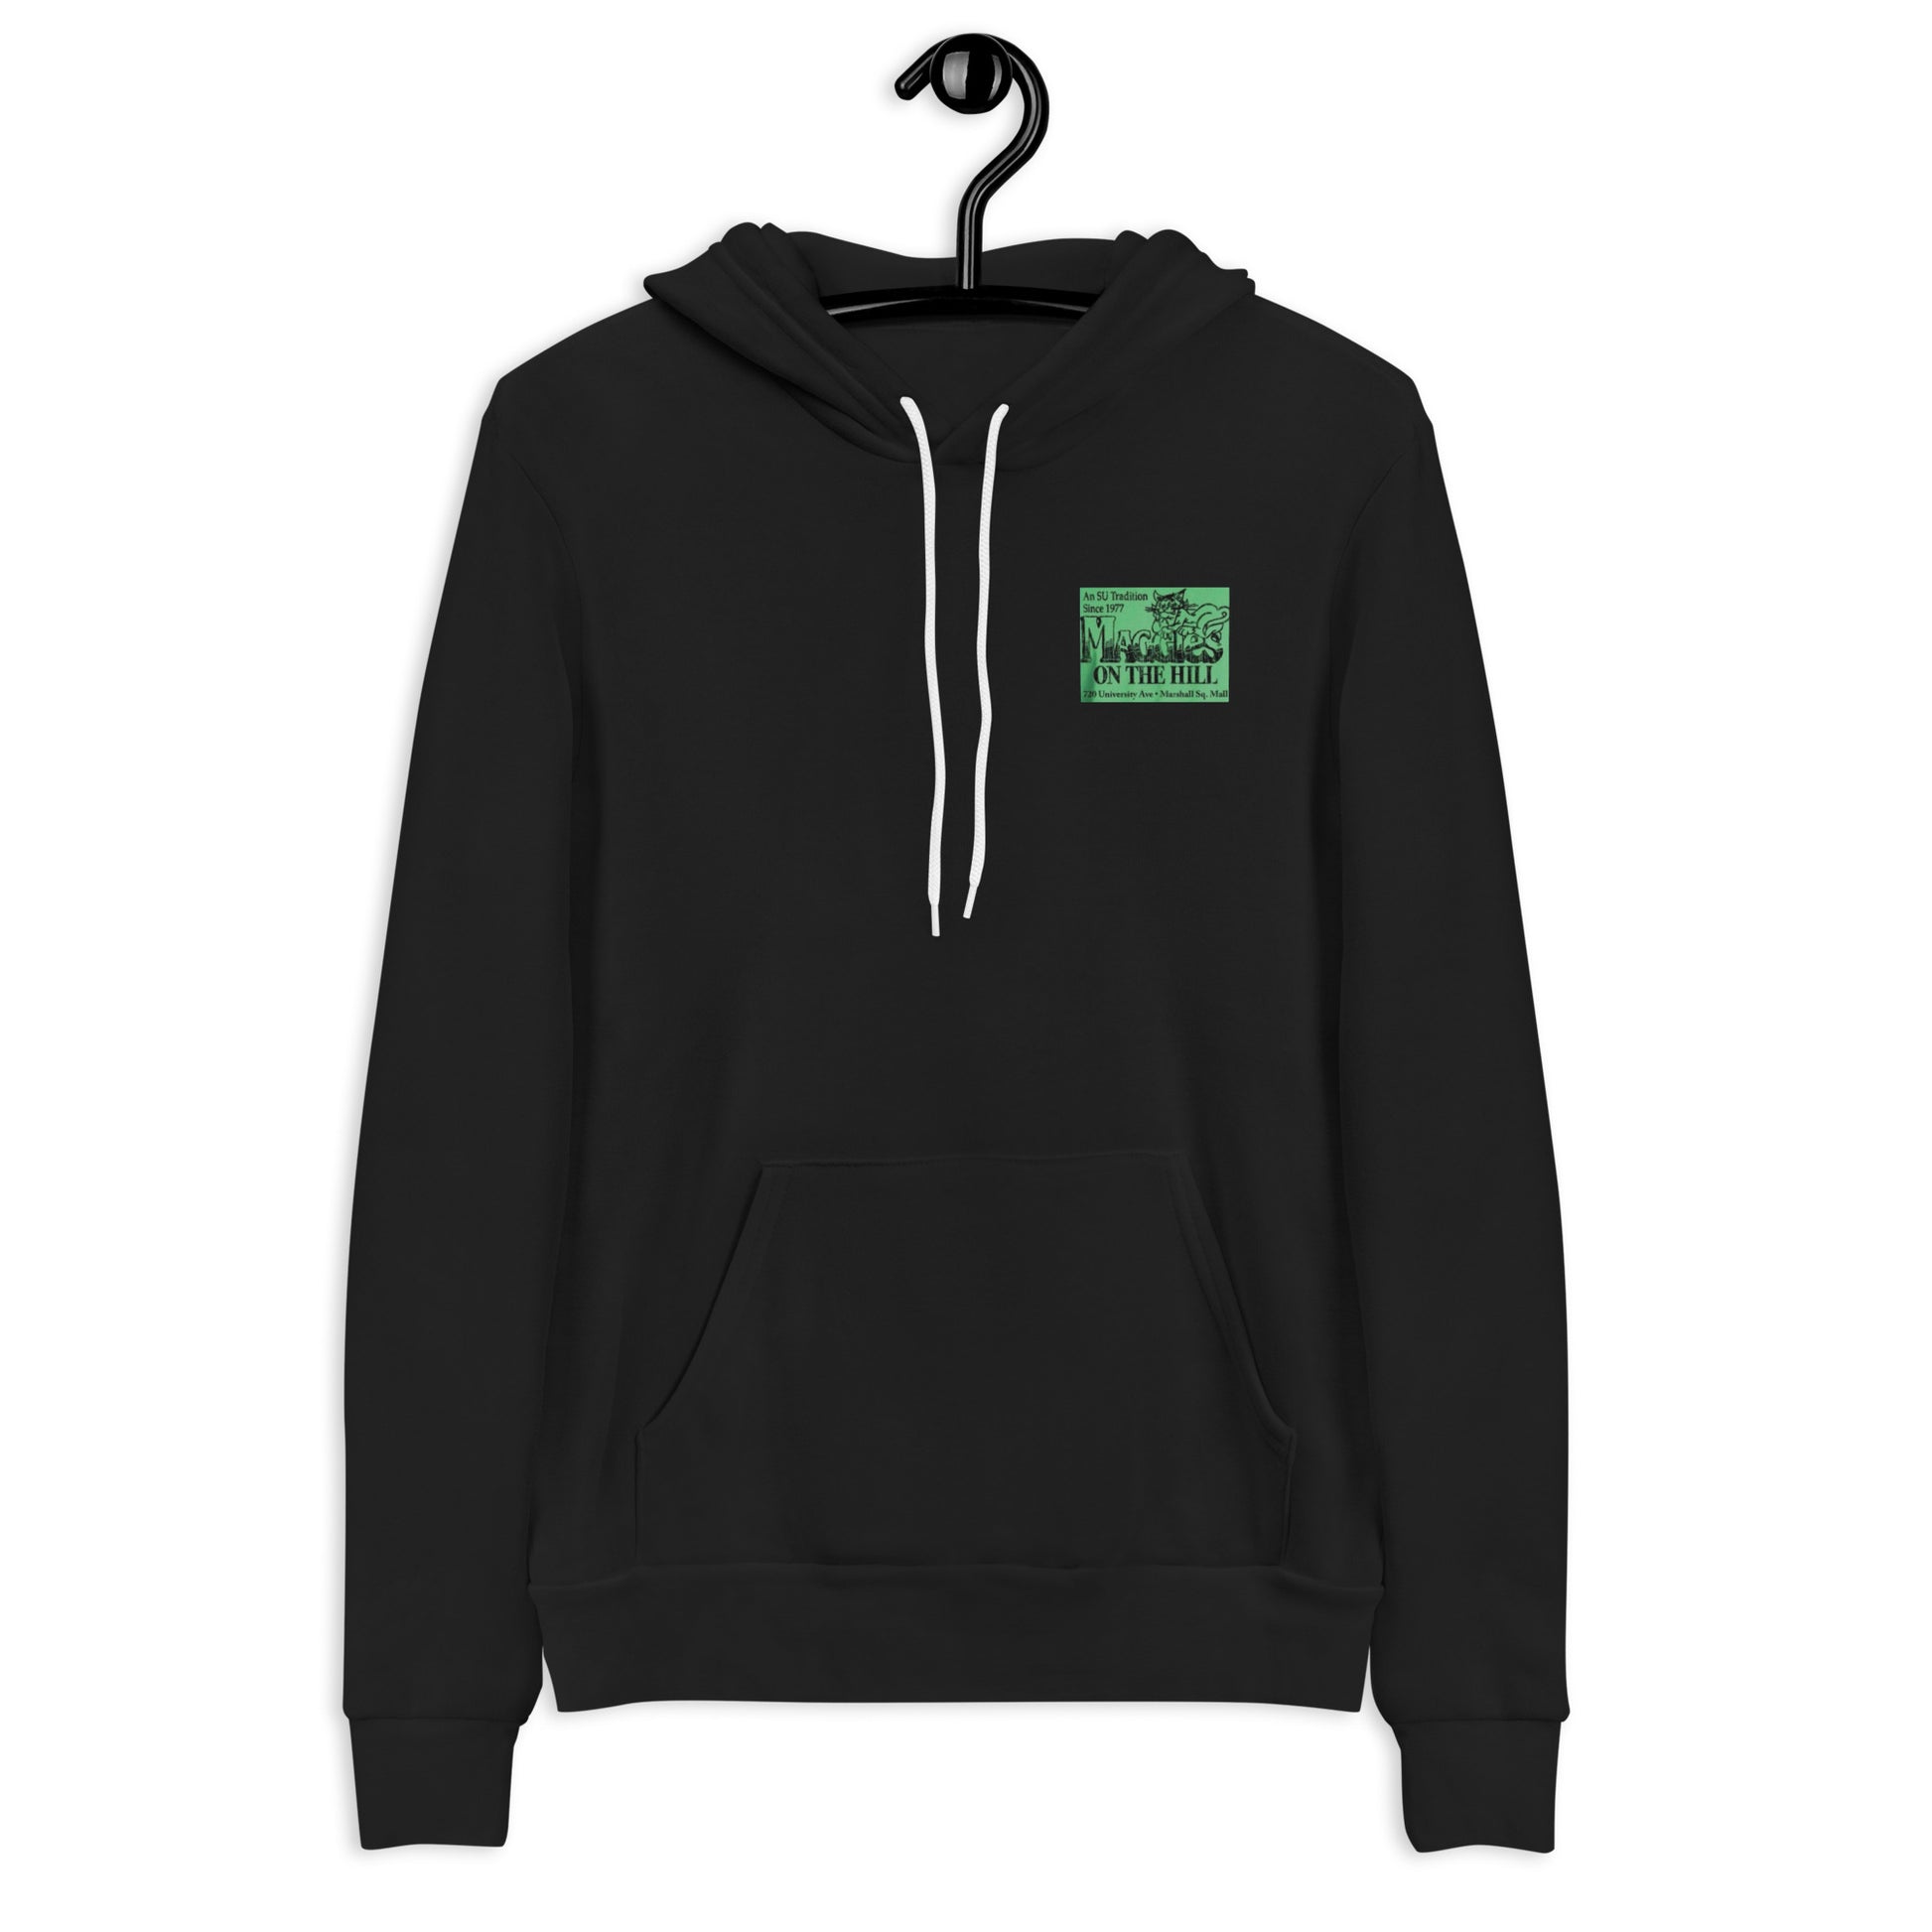 Black fleece blend unisex hoodie that says 'Maggie's on the Hill' 